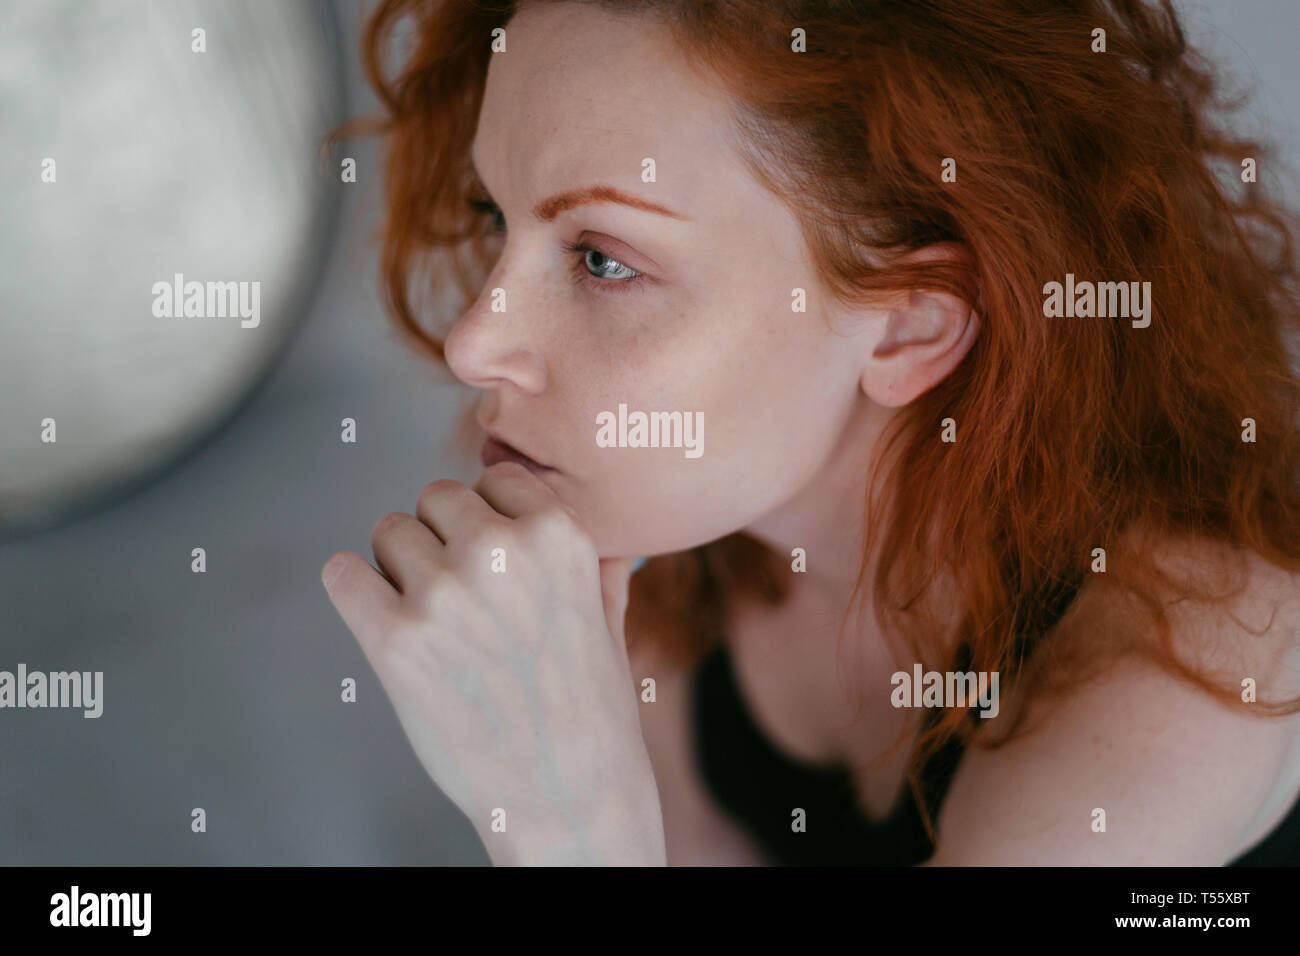 Portrait of redhead young woman Stock Photo